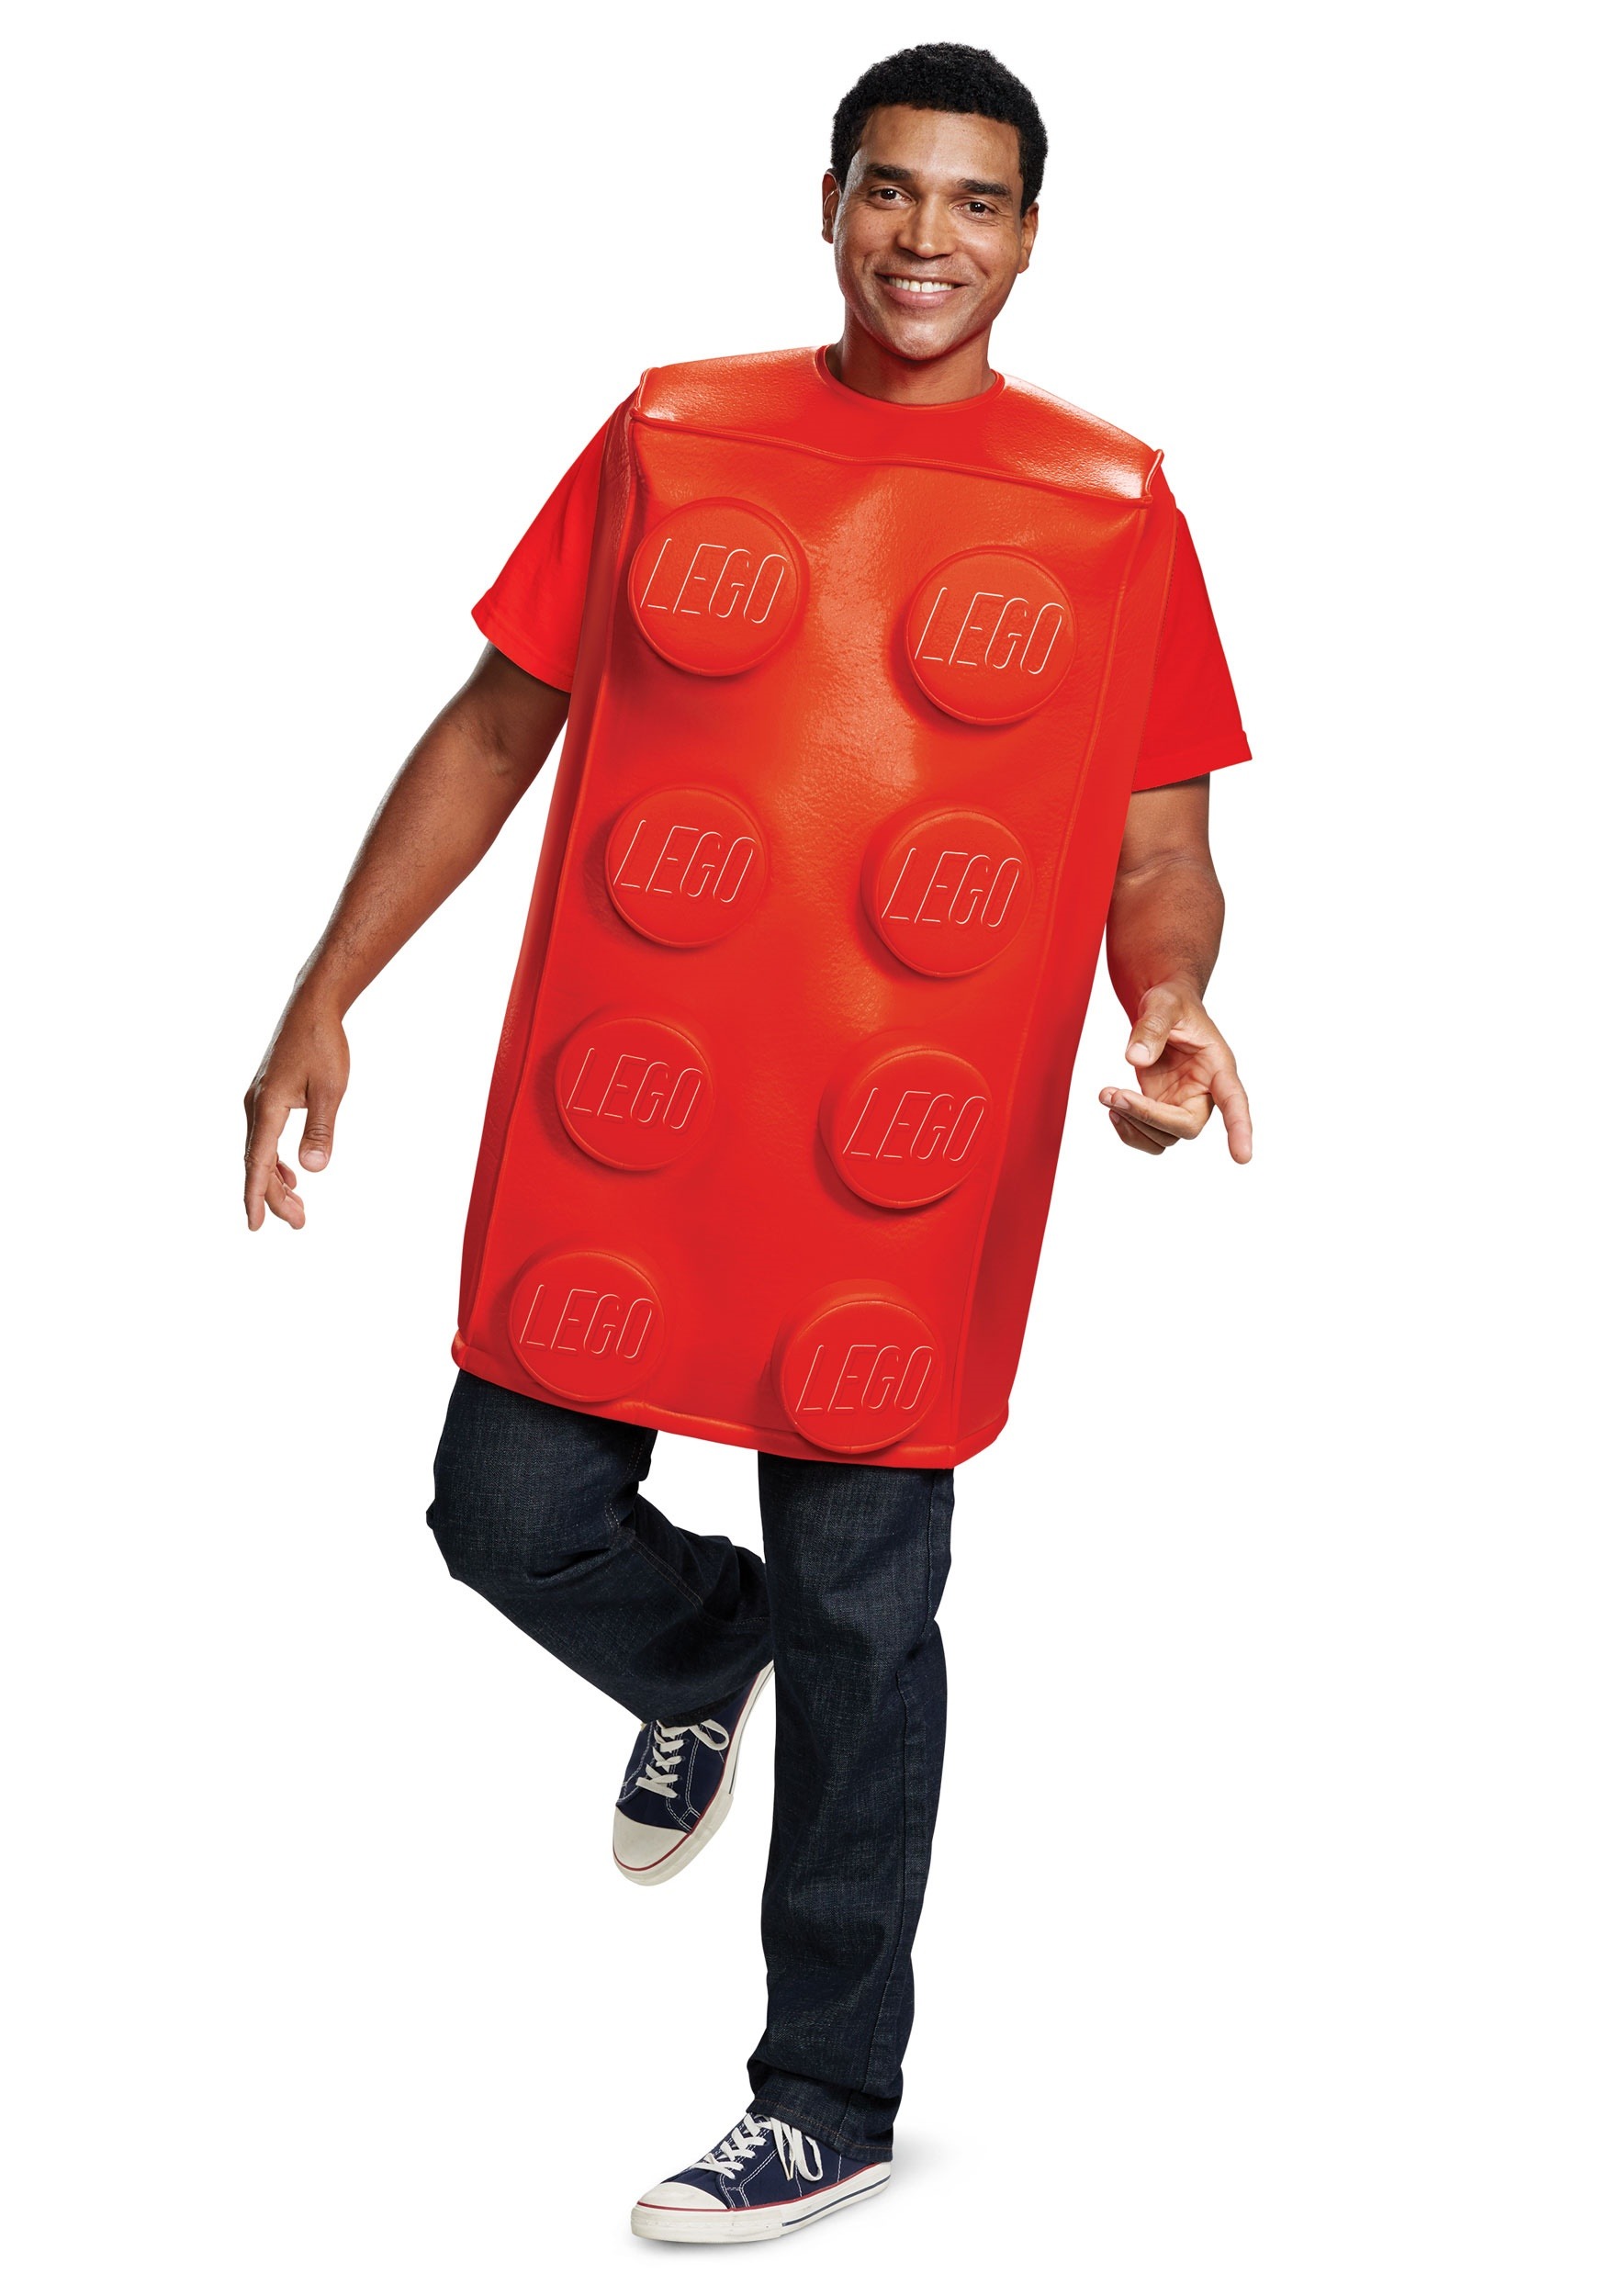 LEGO Red Brick Costume for Adults